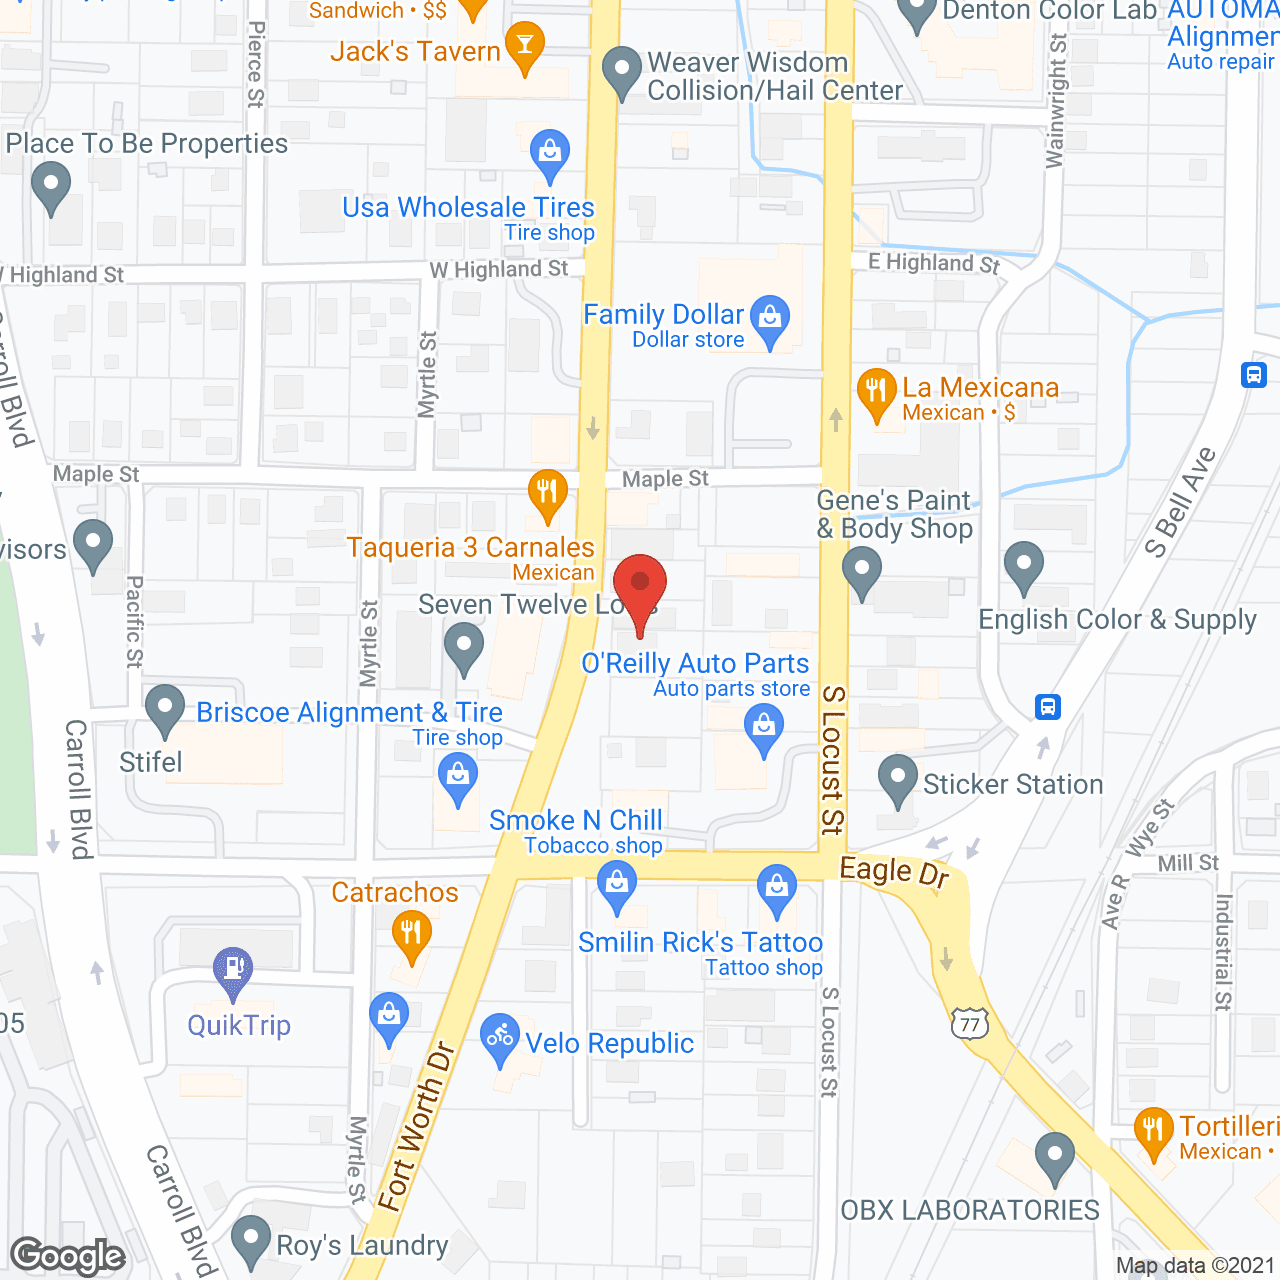 SYNERGY Home Care of Alliance - Denton in google map